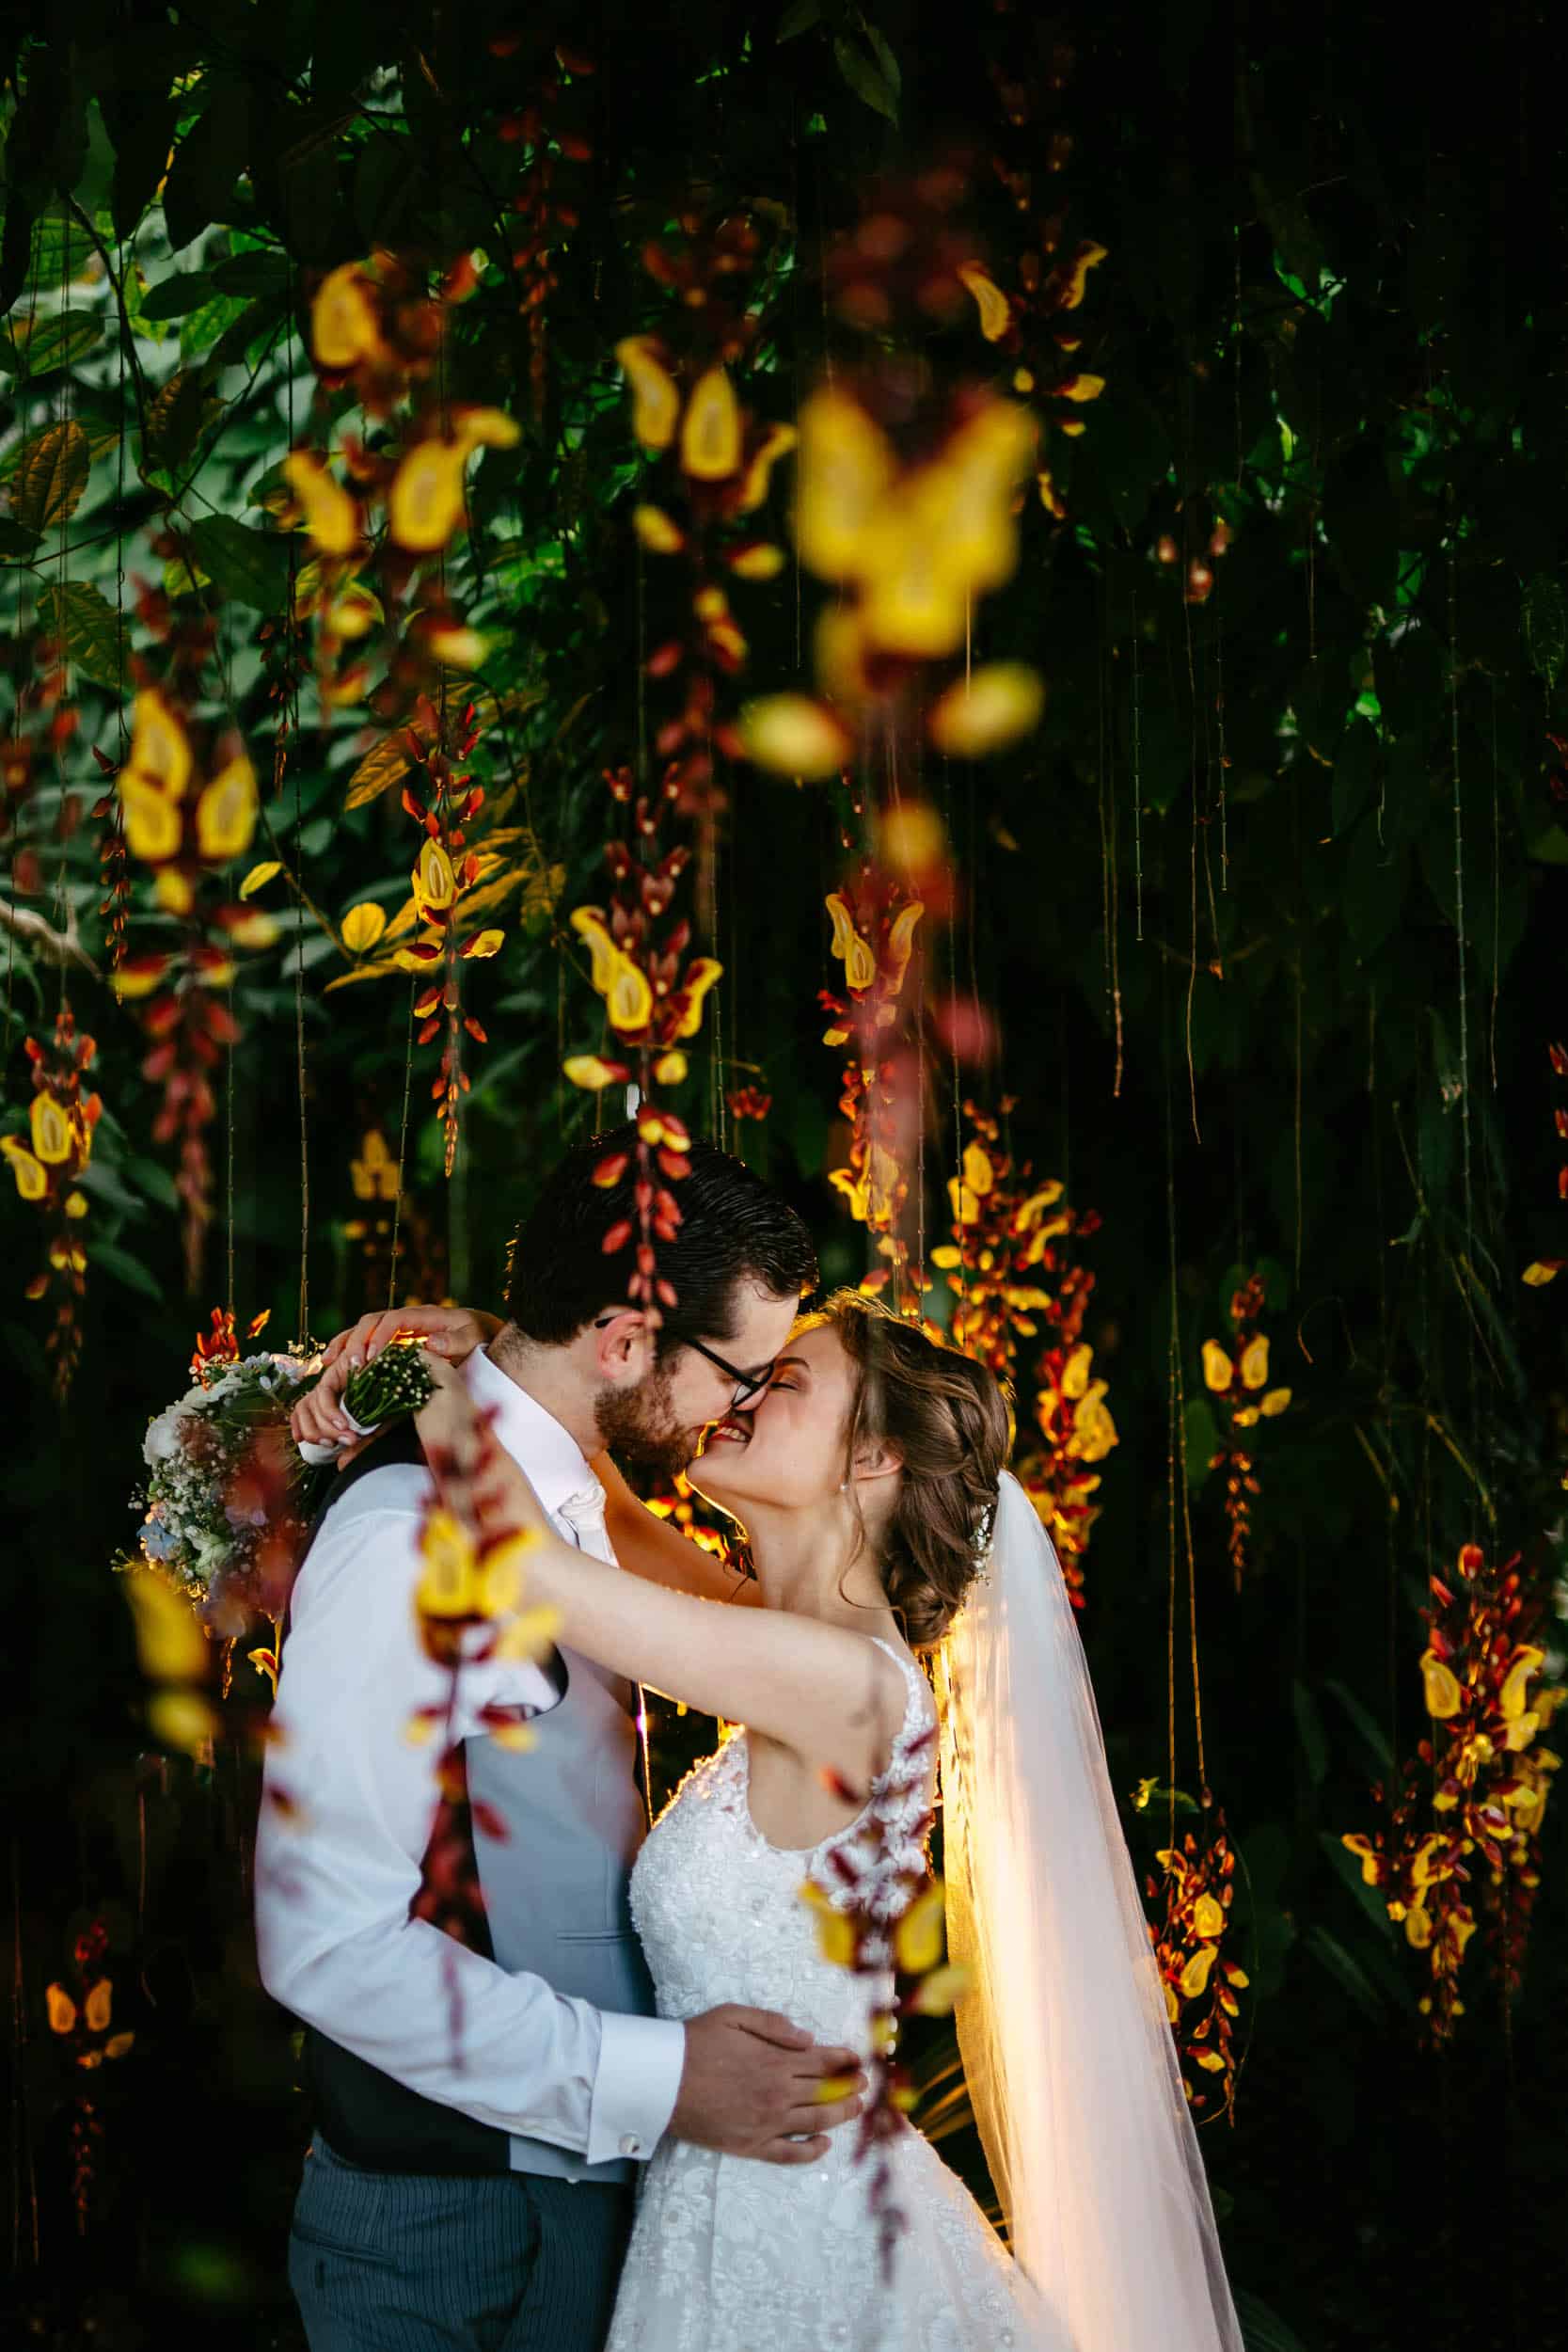 A bride and groom kiss under a canopy of flowers at a Wedding in the delft botanical garden.